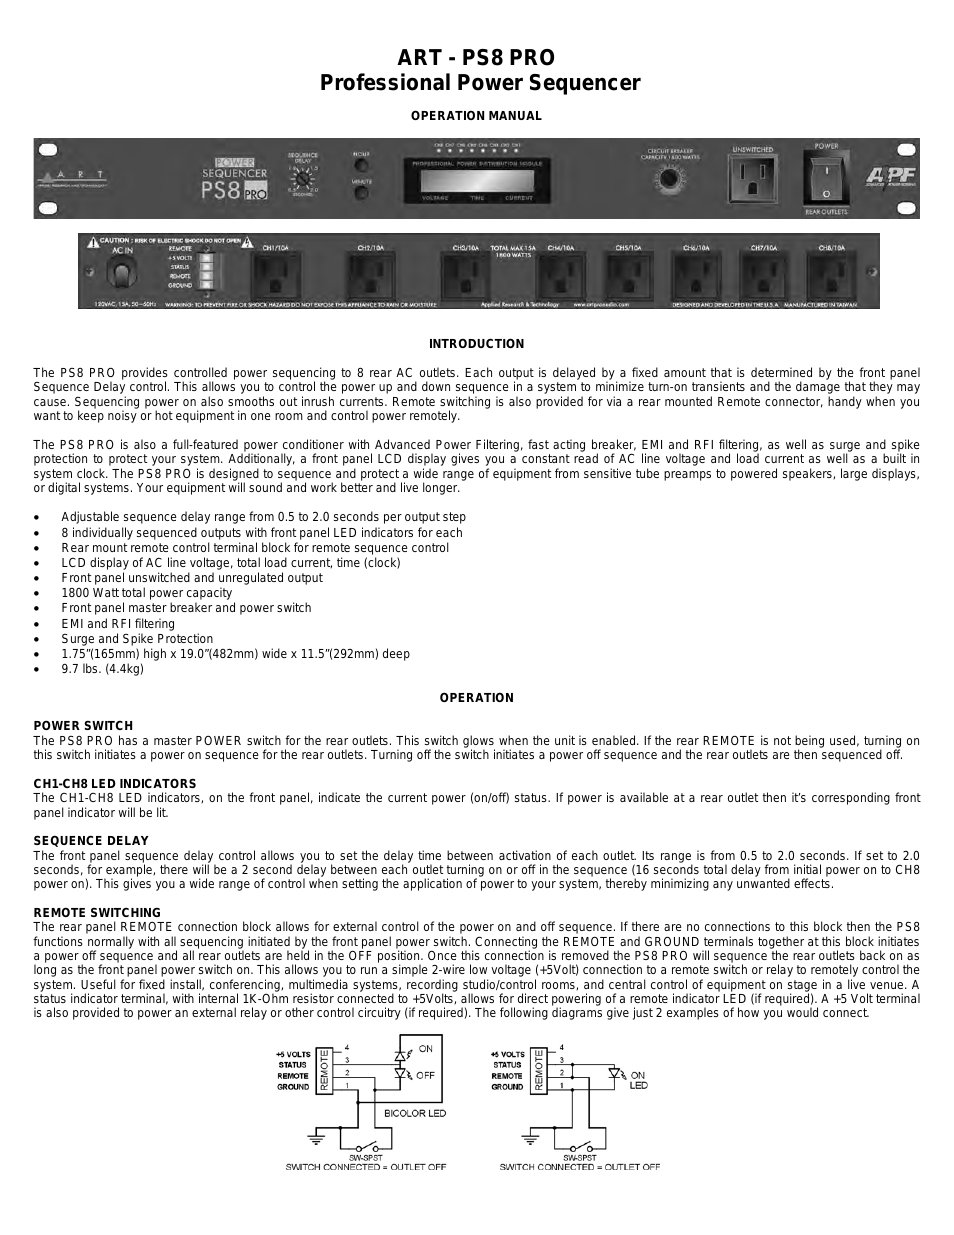 PS8 PRO - Professional Power Sequencer